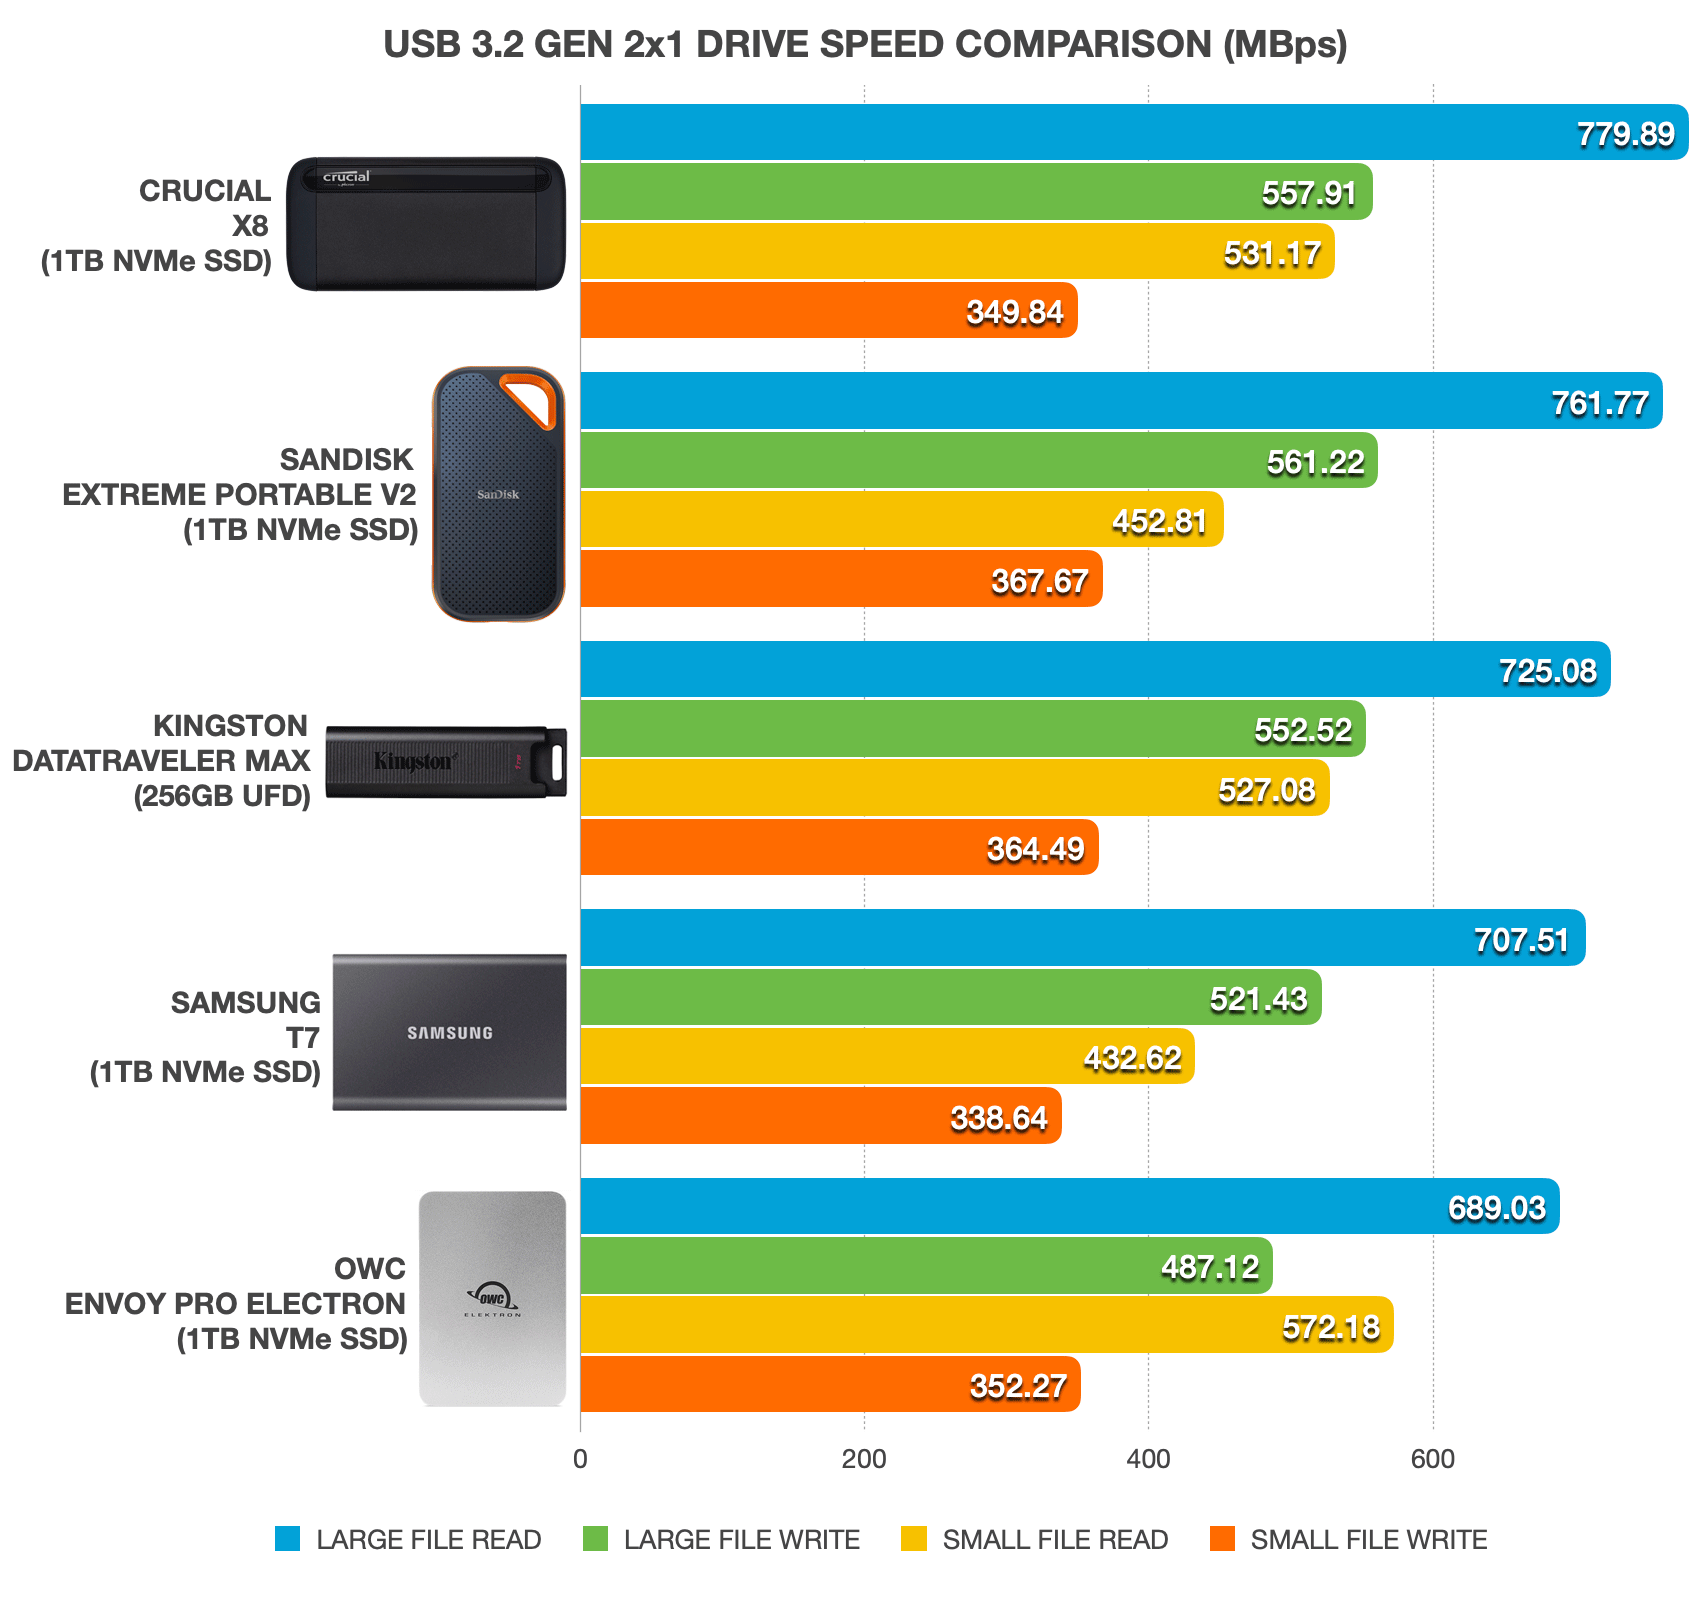 Bar chart showing performance of five different brands of USB 3.2 Gen 2x1 SSDs.